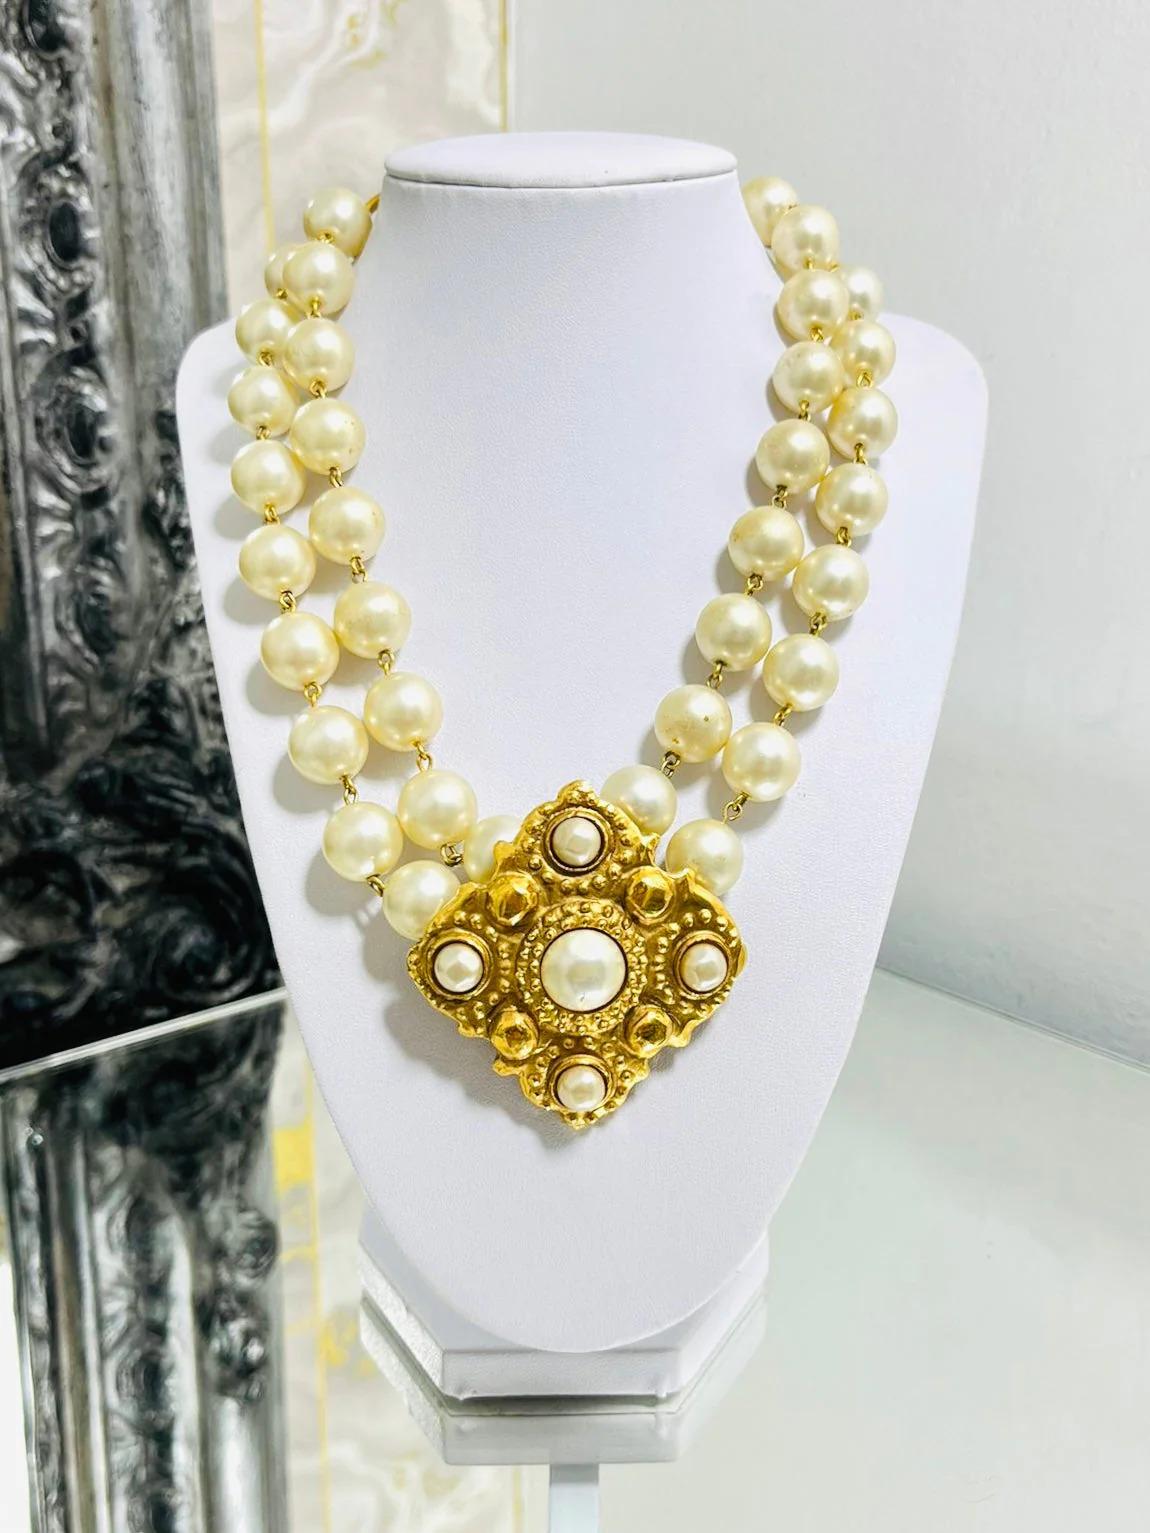 Chanel 1980's Vintage Pearl & 24k Gold Plated Necklace

Double stranded with large centre diamond shaped with hammered style and pearls. Gold chain closure with dangle 'CC' logo.

Additional information:
Size – One Size
Composition – Faux Pearl, 24k